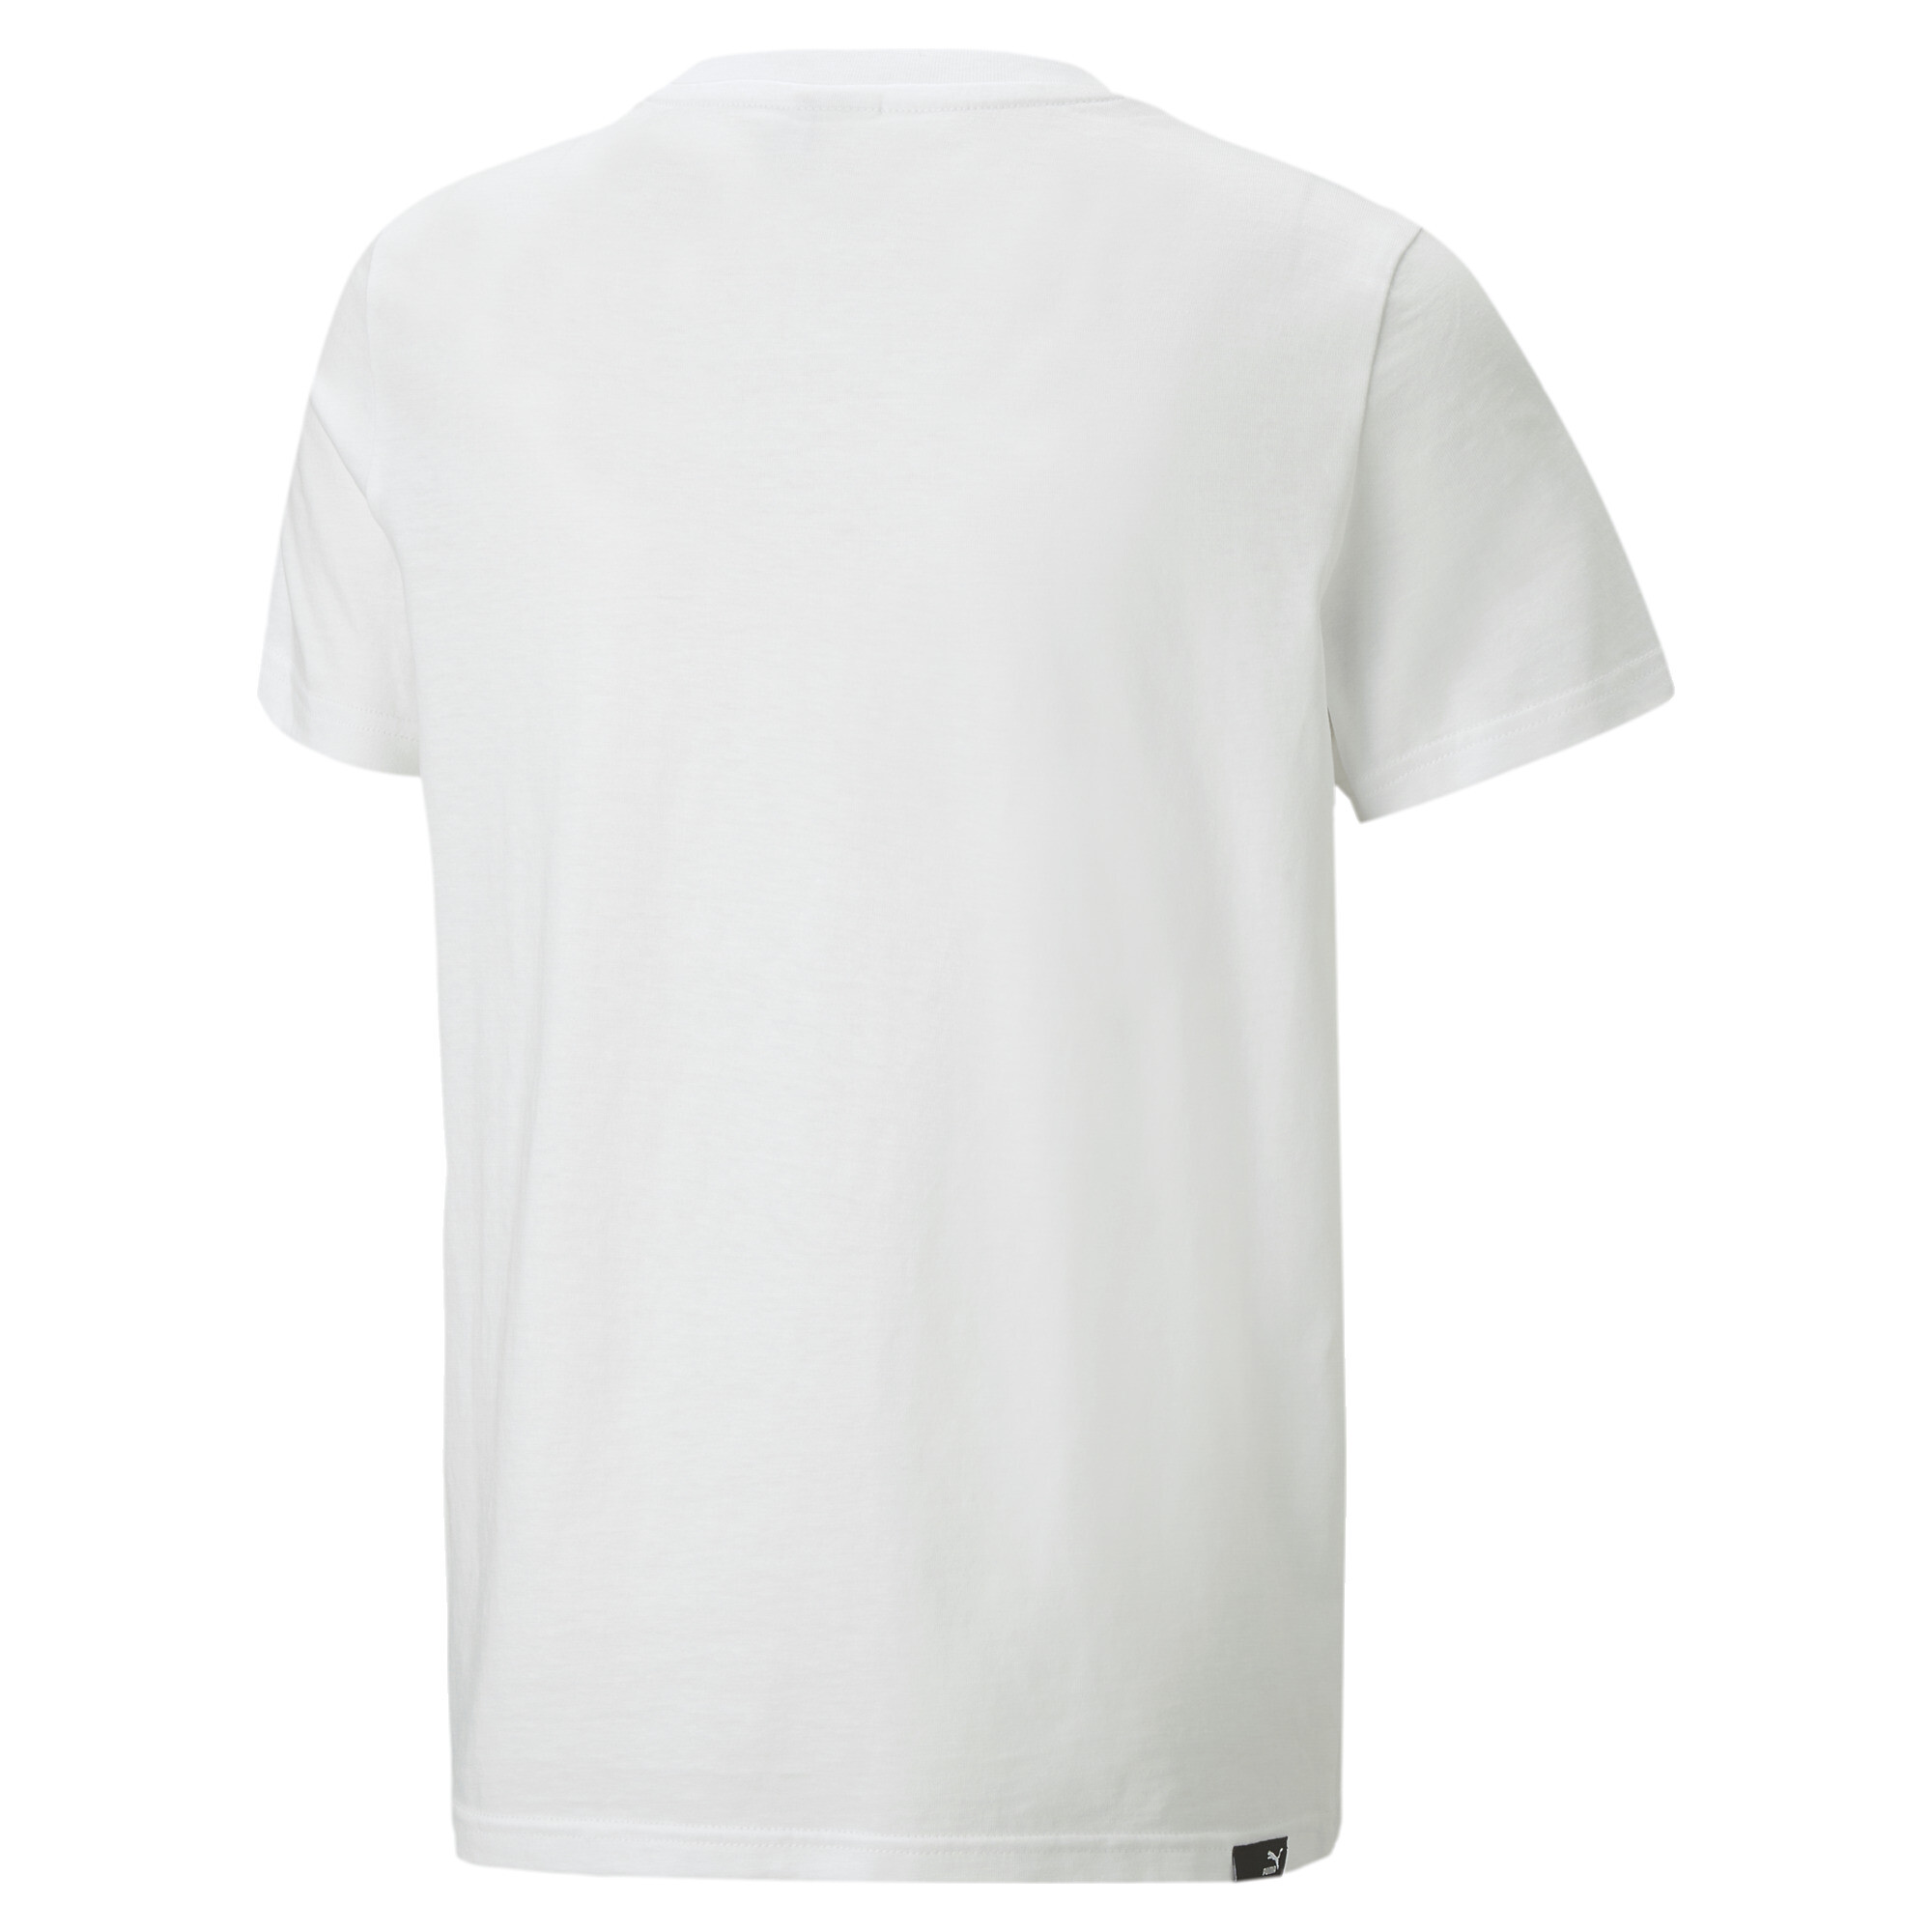 Classics Gen. PUMA T-Shirt In White, Size 9-10 Youth